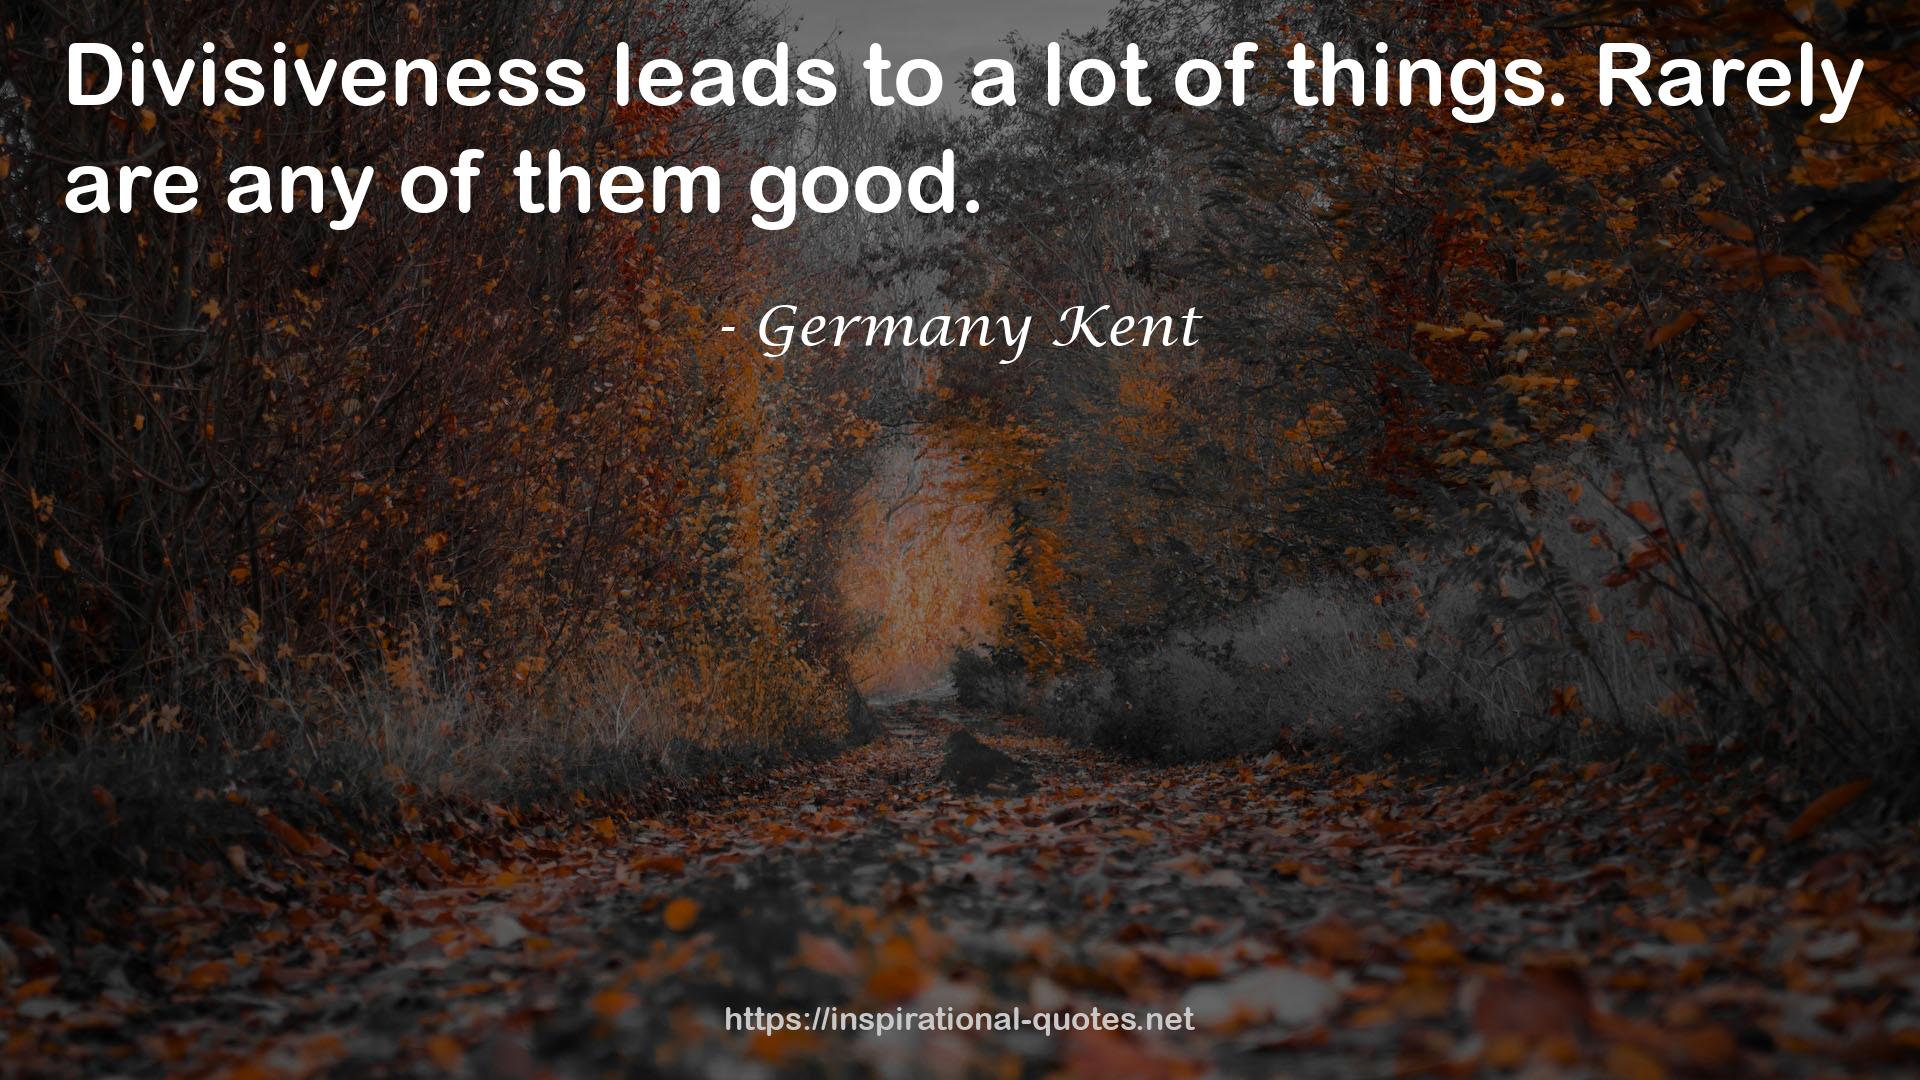 Germany Kent QUOTES